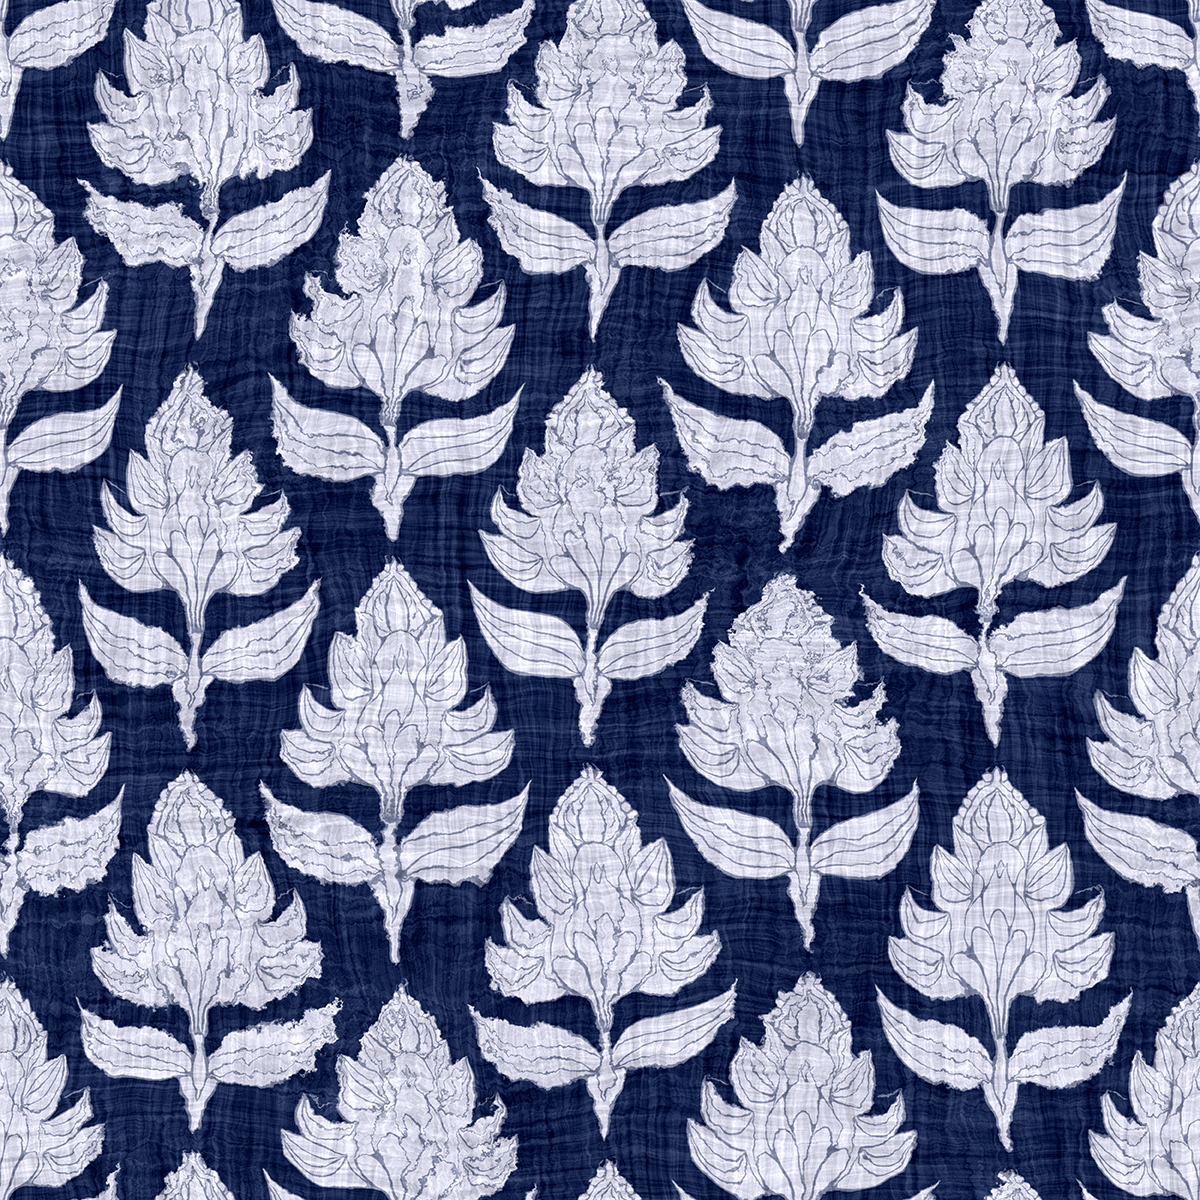 A blue and white floral pattern